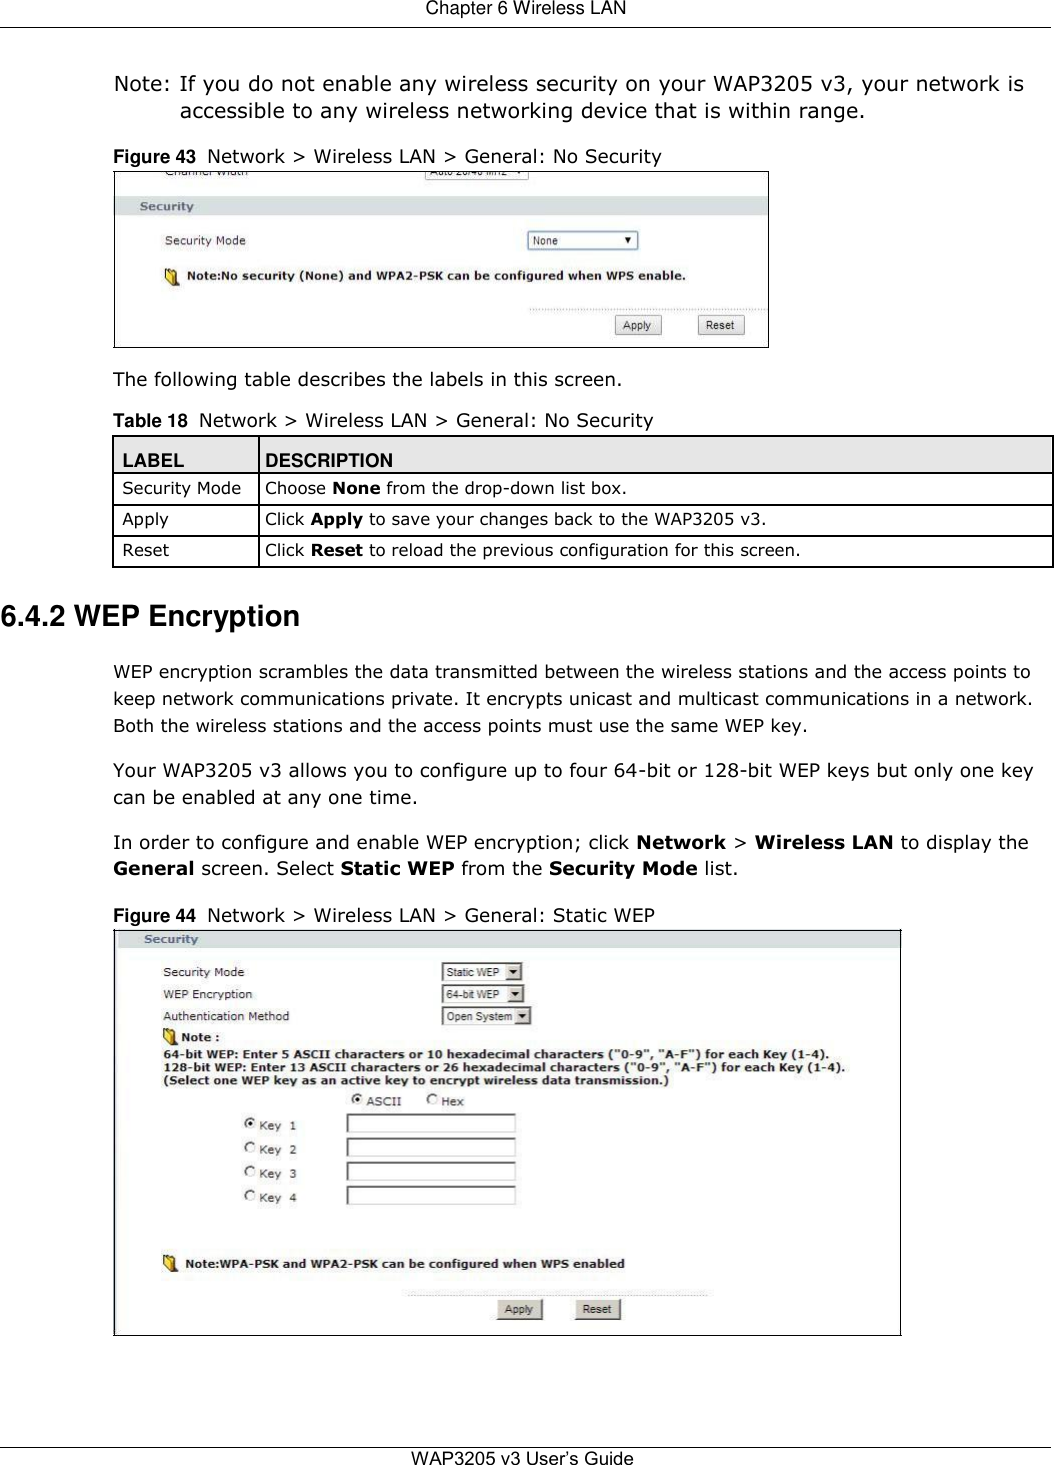  Chapter 6 Wireless LAN   Note: If you do not enable any wireless security on your WAP3205 v3, your network is accessible to any wireless networking device that is within range.  Figure 43  Network &gt; Wireless LAN &gt; General: No Security          The following table describes the labels in this screen.  Table 18  Network &gt; Wireless LAN &gt; General: No Security  LABEL DESCRIPTION Security Mode Choose None from the drop-down list box.   Apply Click Apply to save your changes back to the WAP3205 v3.   Reset Click Reset to reload the previous configuration for this screen.    6.4.2 WEP Encryption  WEP encryption scrambles the data transmitted between the wireless stations and the access points to keep network communications private. It encrypts unicast and multicast communications in a network. Both the wireless stations and the access points must use the same WEP key.  Your WAP3205 v3 allows you to configure up to four 64-bit or 128-bit WEP keys but only one key can be enabled at any one time.  In order to configure and enable WEP encryption; click Network &gt; Wireless LAN to display the  General screen. Select Static WEP from the Security Mode list.  Figure 44  Network &gt; Wireless LAN &gt; General: Static WEP                          WAP3205 v3 User’s Guide 